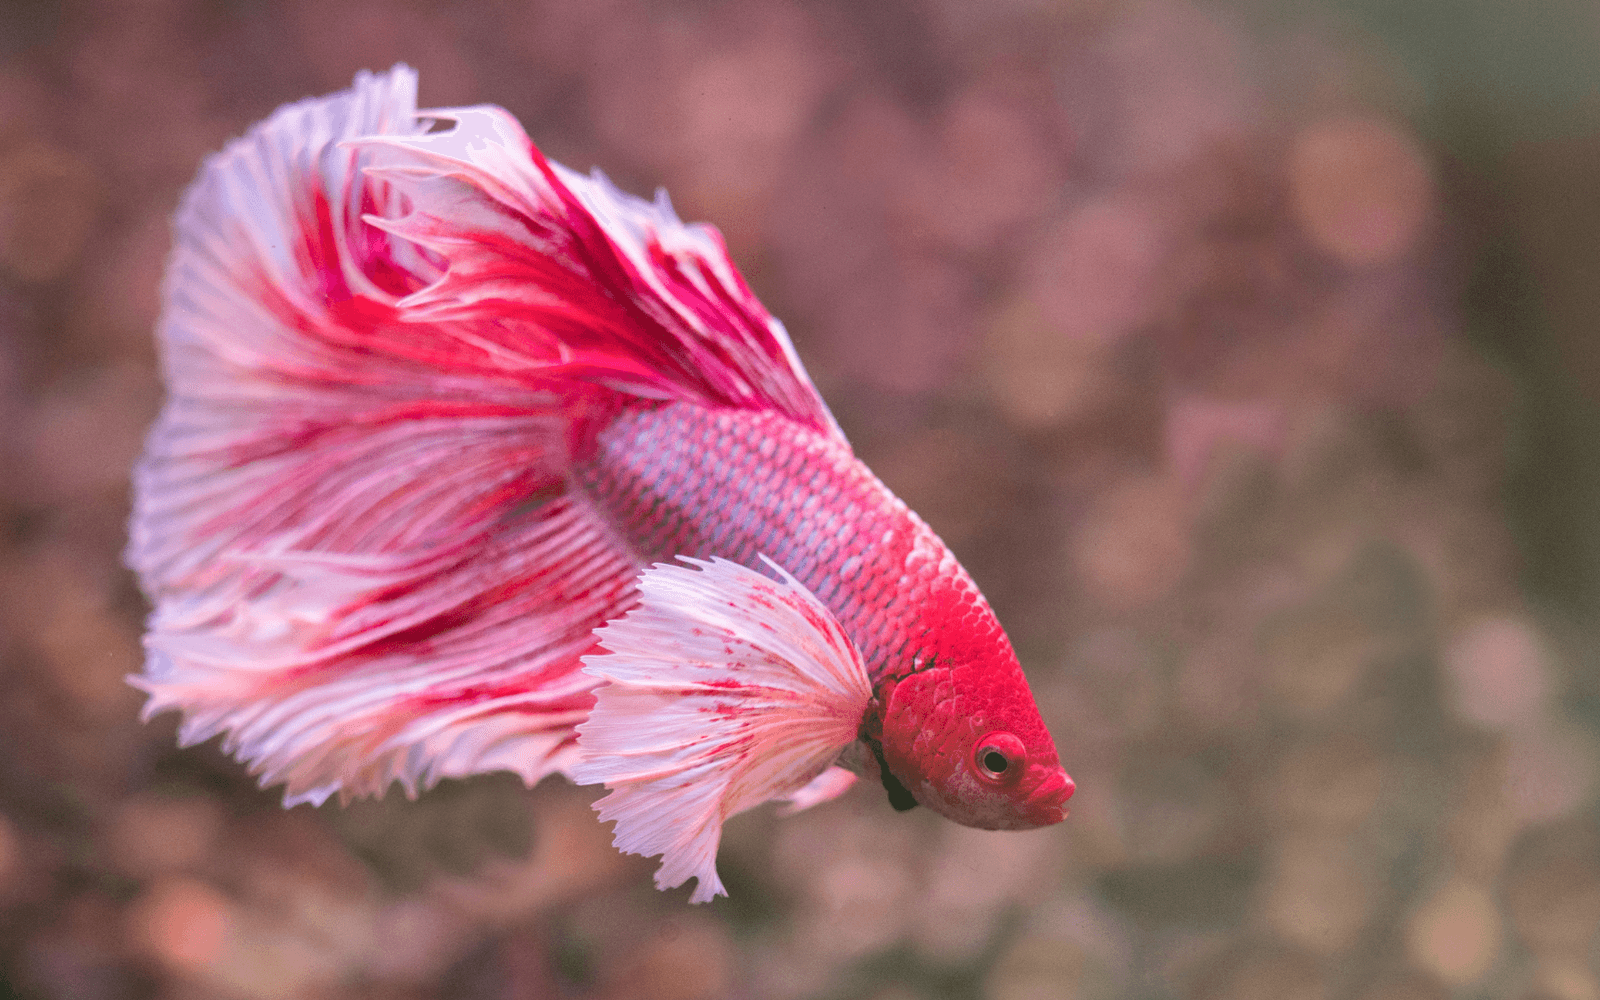 A red betta with a long tail